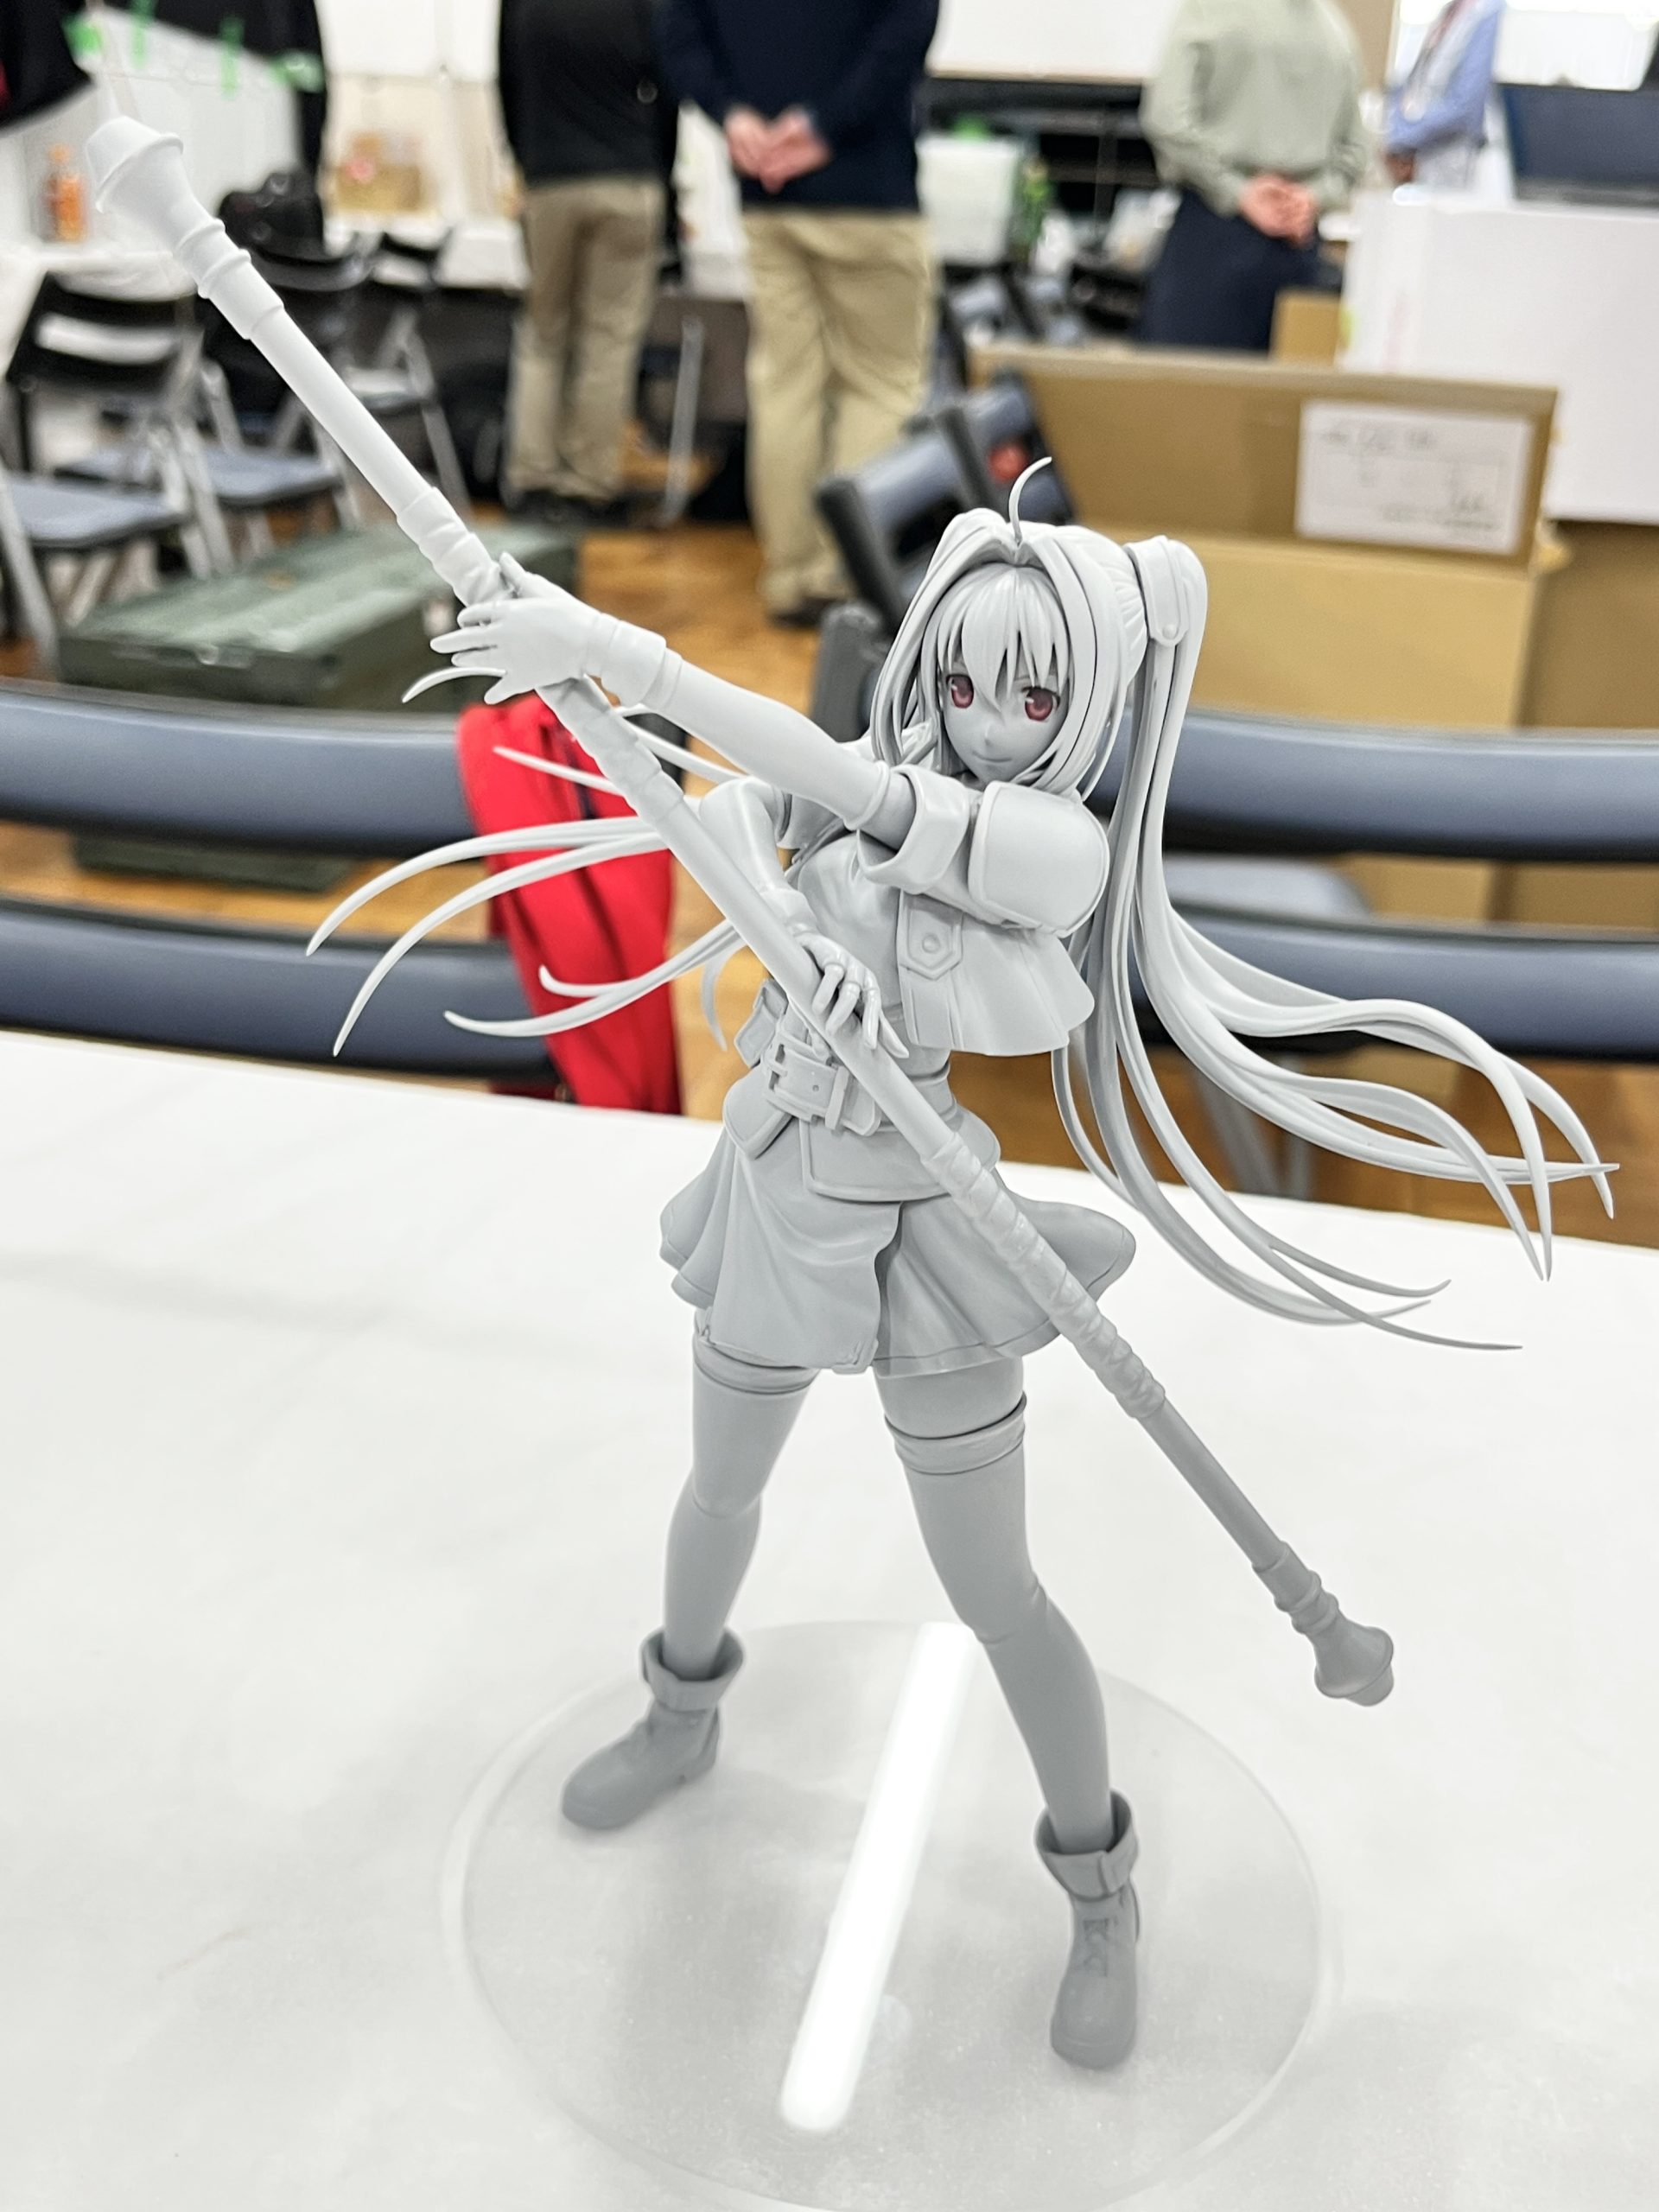 Trails in the Sky Estelle Bright Figure Prototype Shares New Images